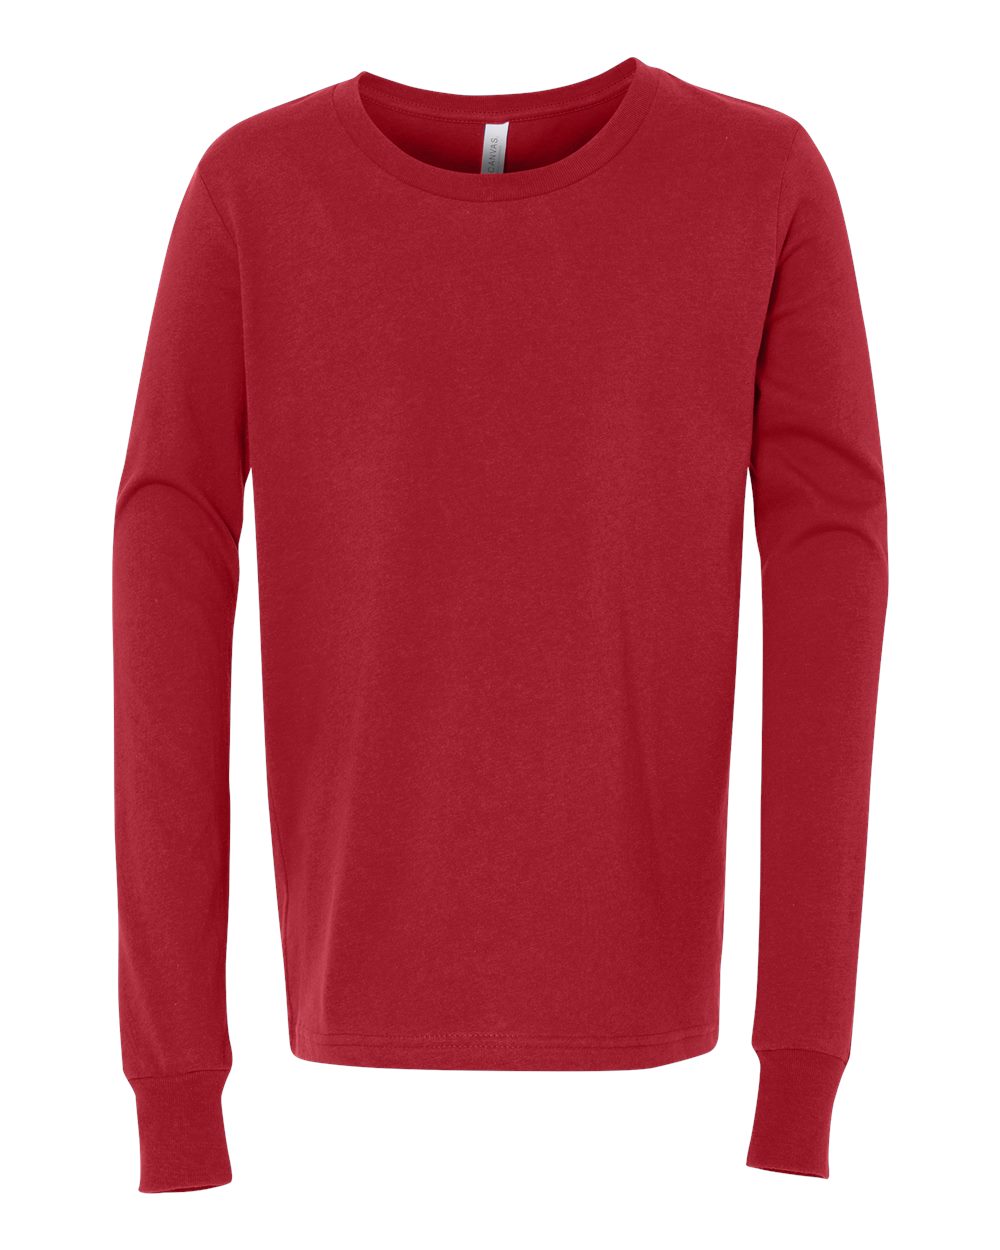 Bella + Canvas Youth Long Sleeve (3501y) in Red